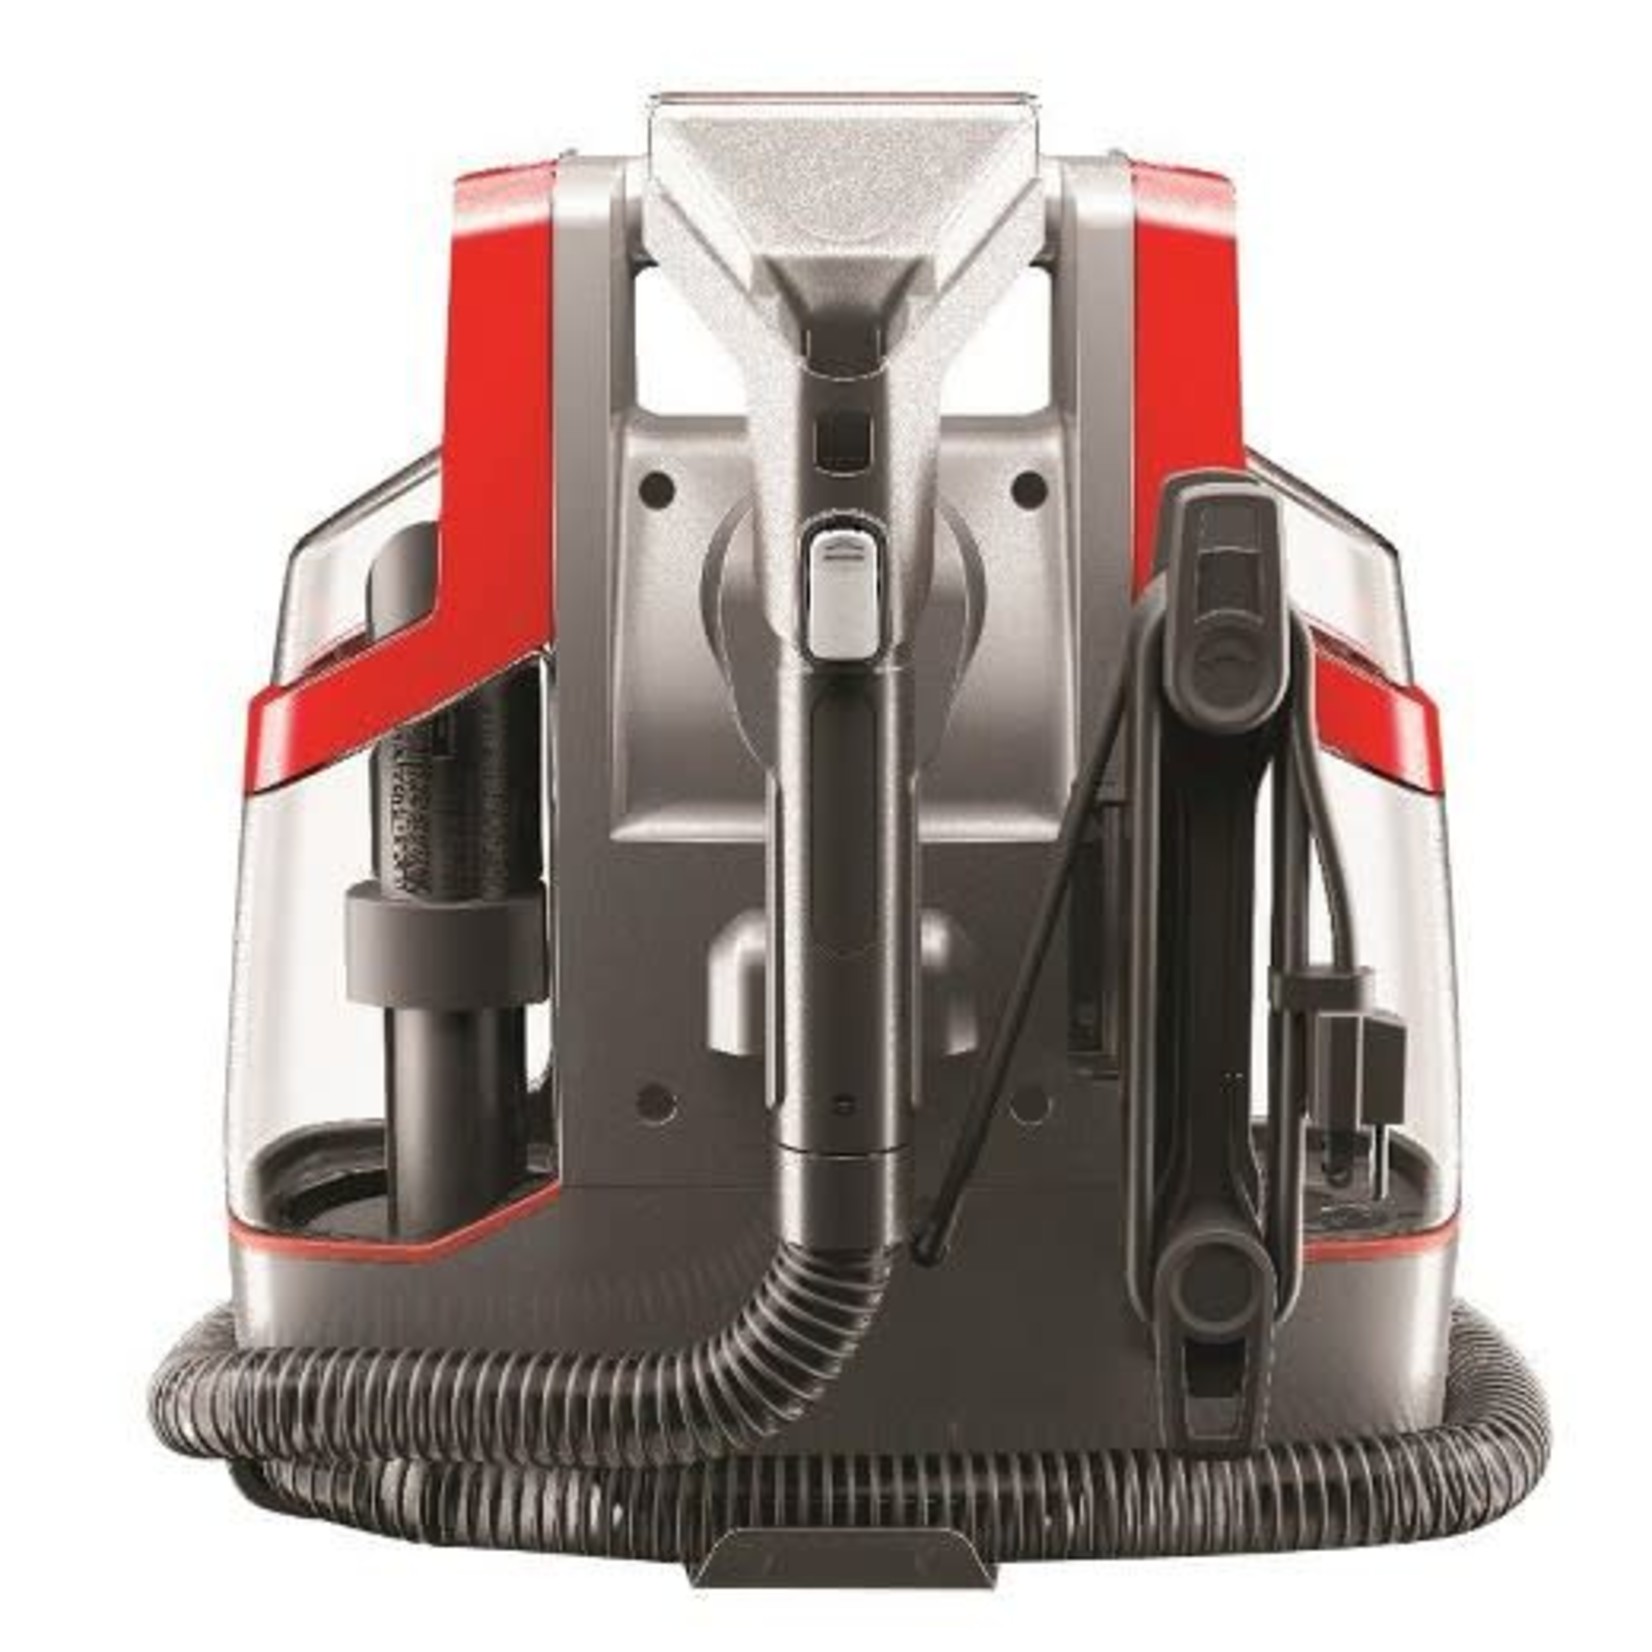 Hoover Hoover Spotless Spot Remover - Red Trim - FH11300